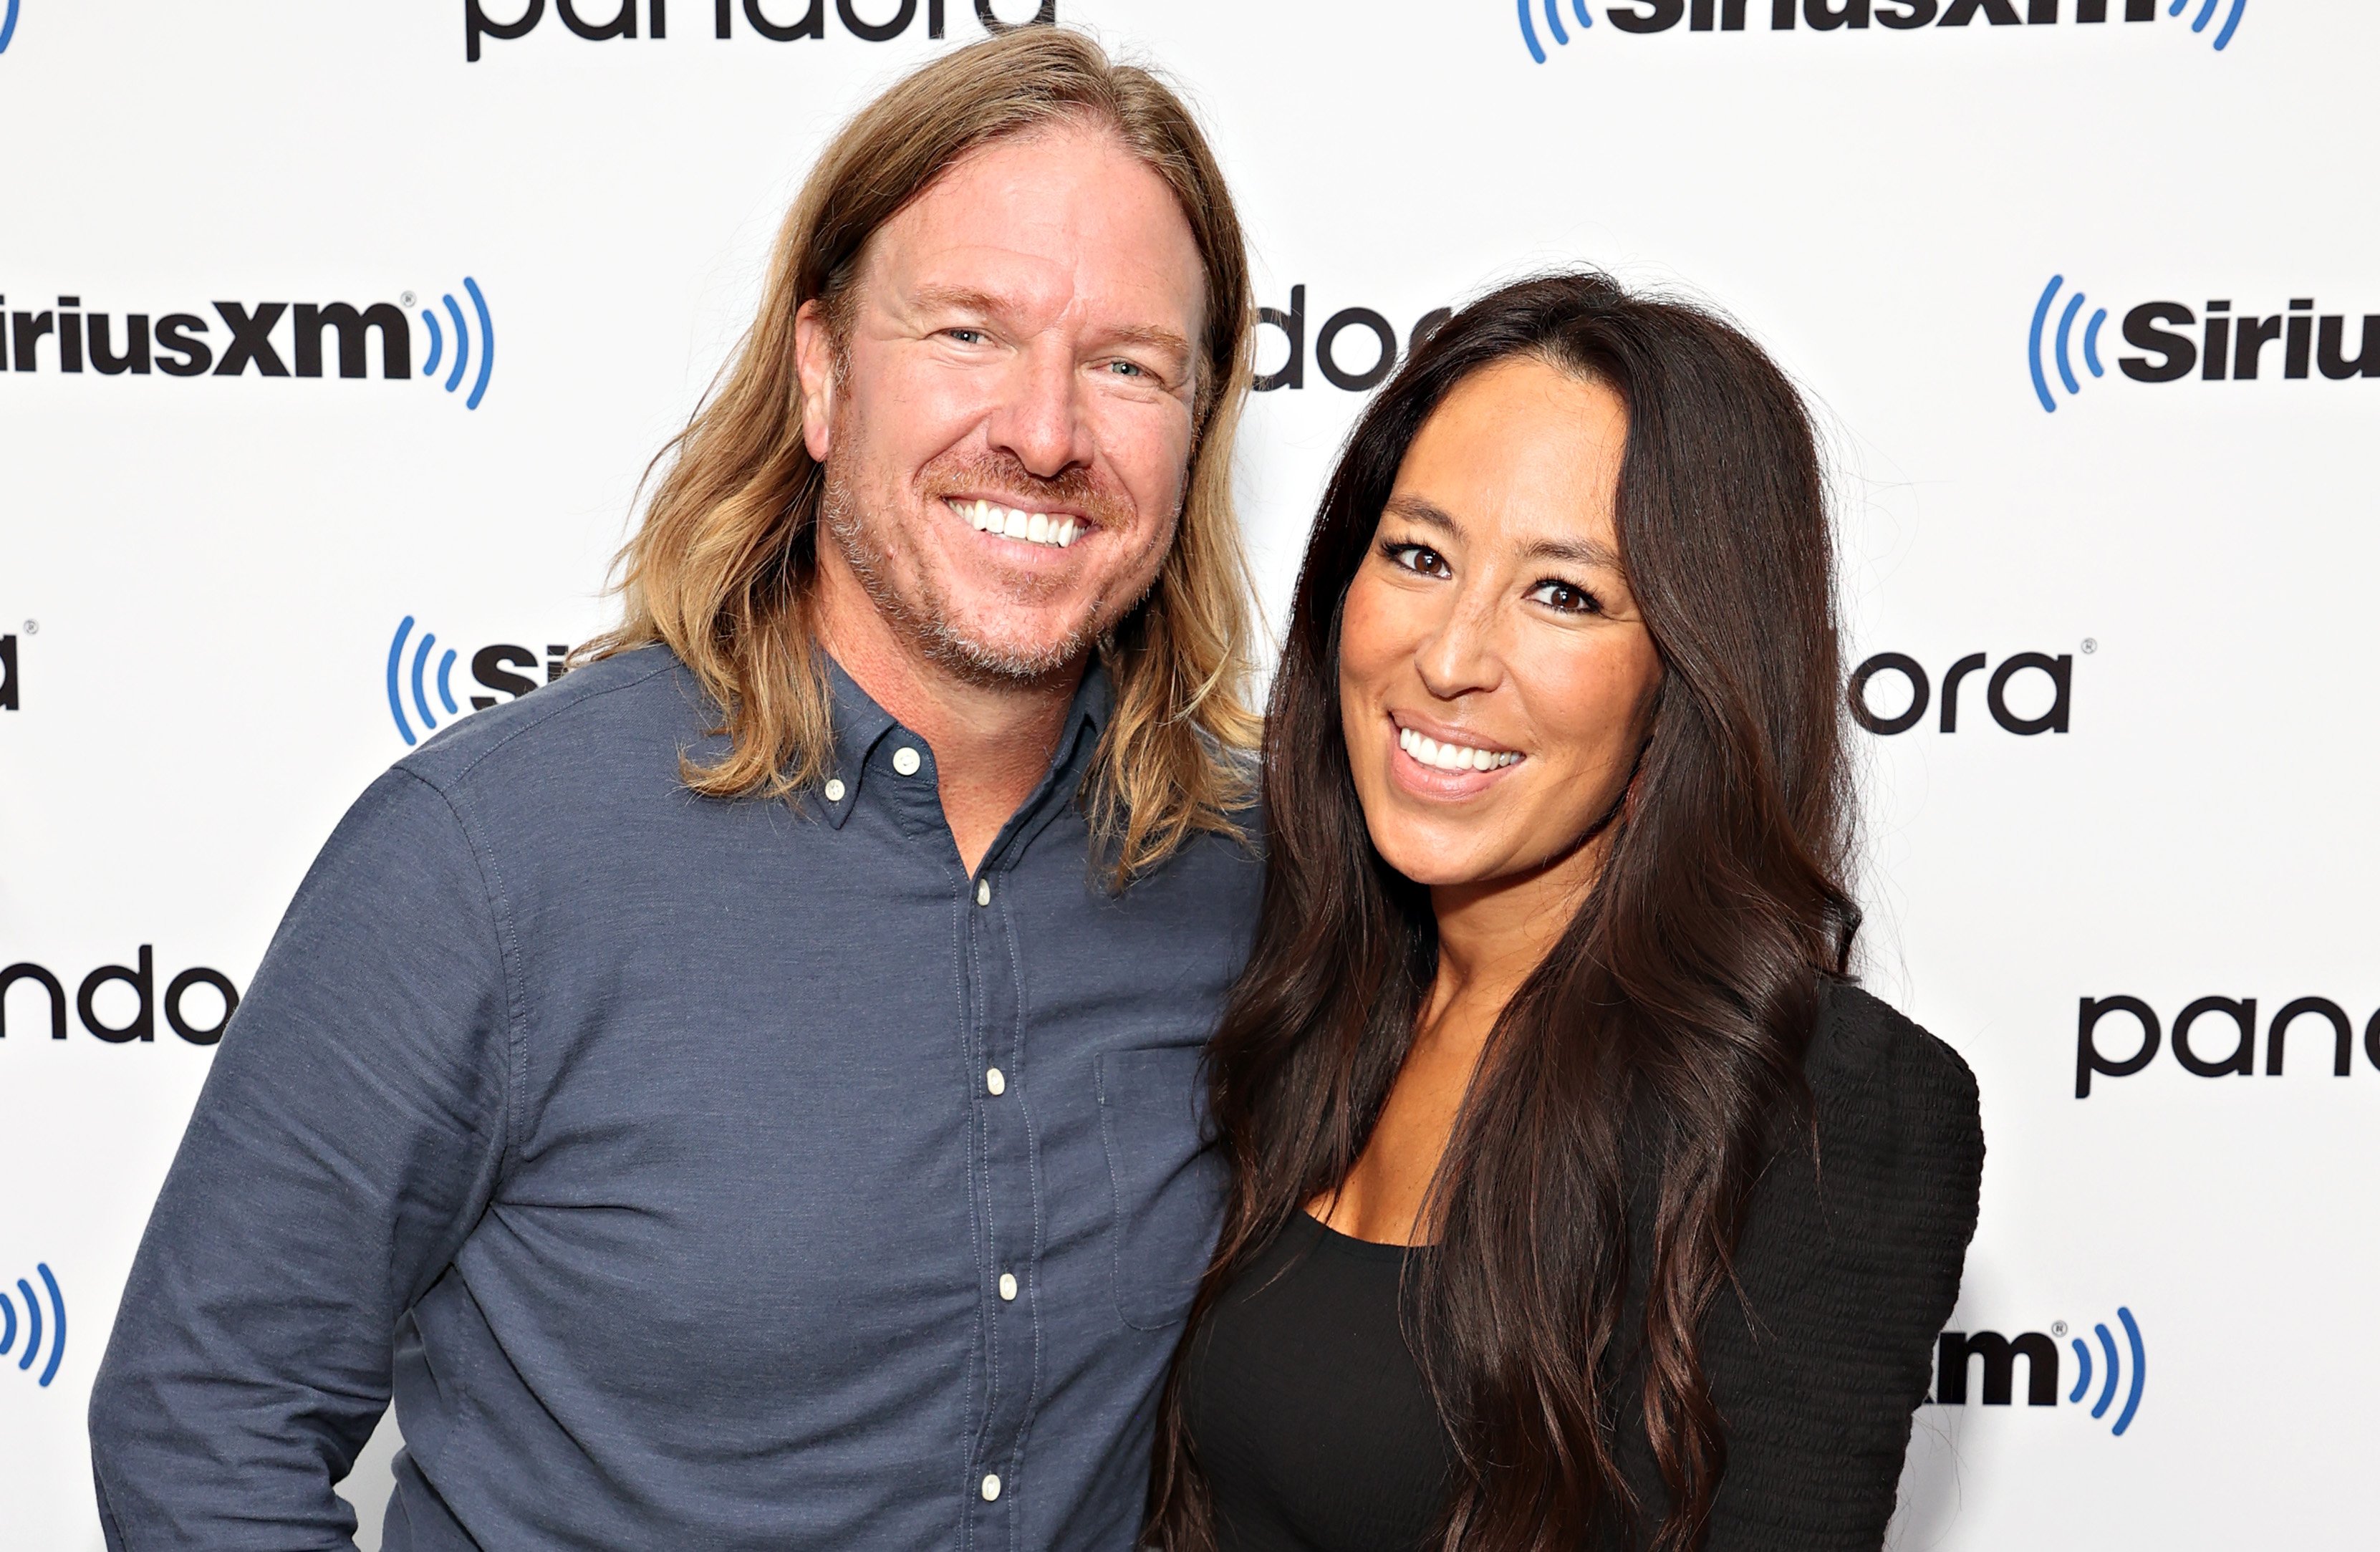 Chip Gaines and Magnolia Journal founder Joanna Gaines pose at an event, with Chip wearing a gray button down shirt and Joanna wearing a black top